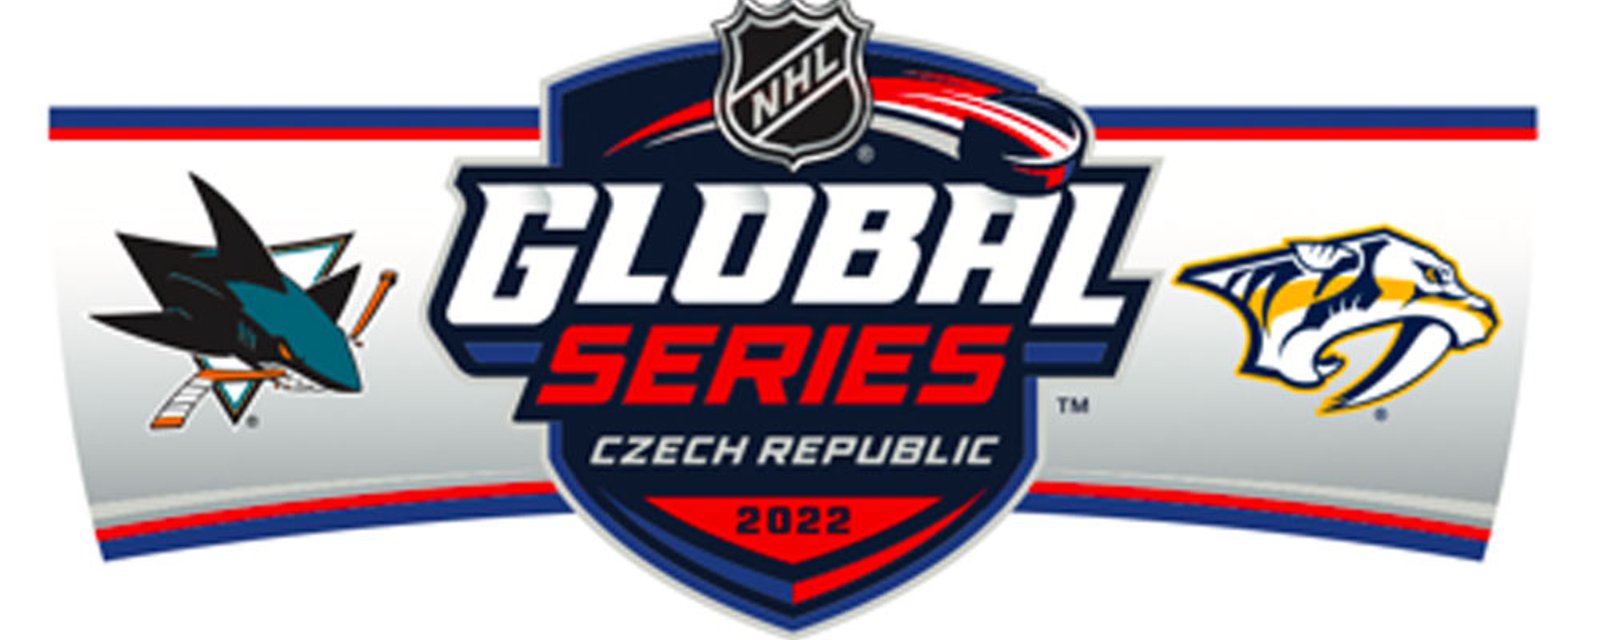 Czech government bans Russian NHLers from upcoming games